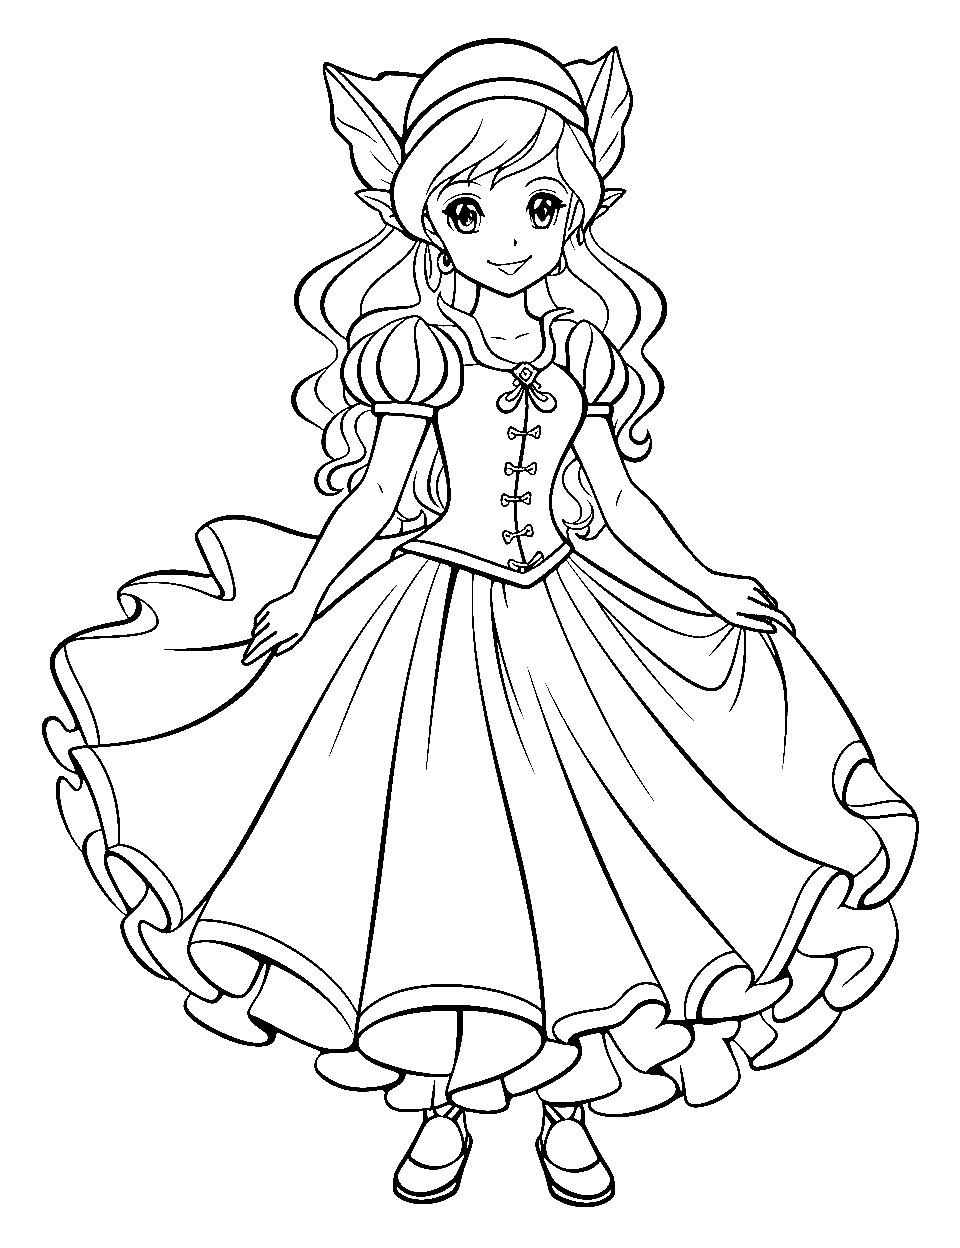 Anime-Style Elf Princess Coloring Page - A beautiful anime-inspired elf princess in a flowing gown.